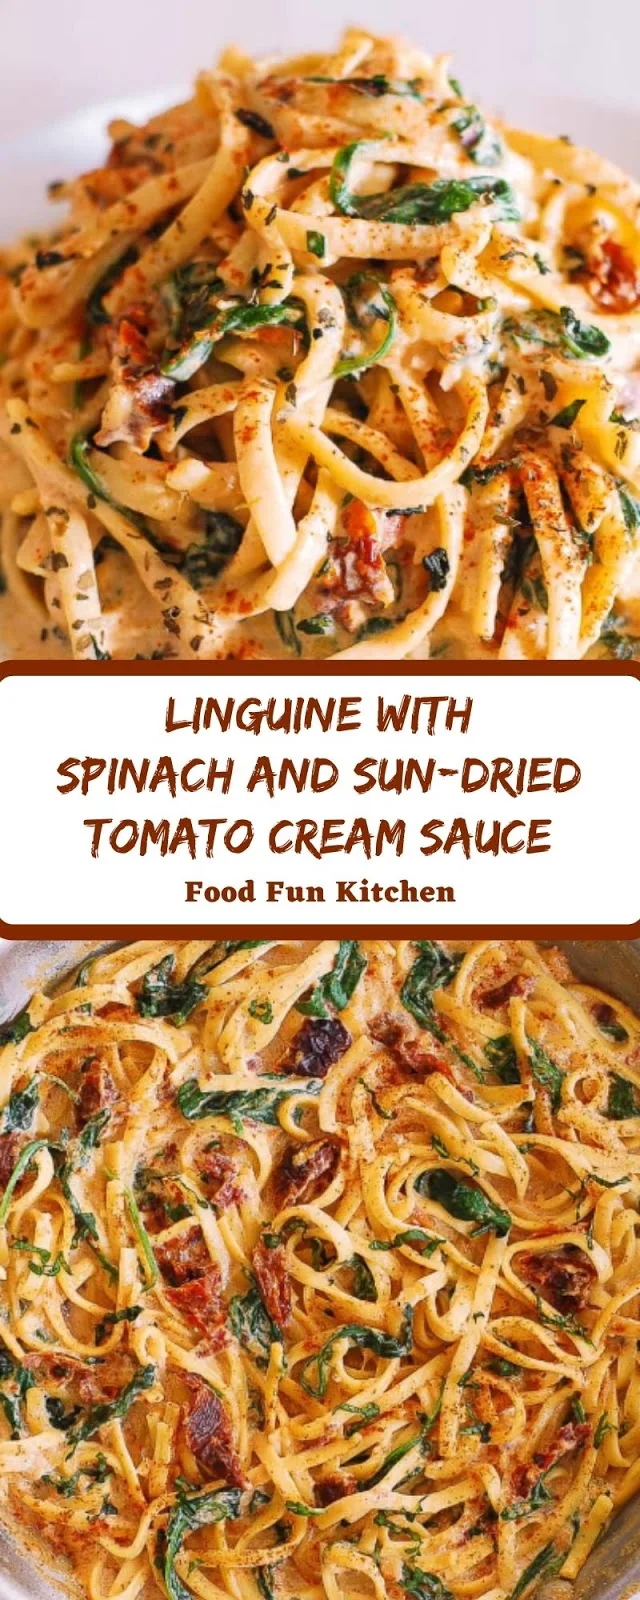 LINGUINE WITH SPINACH AND SUN-DRIED TOMATO CREAM SAUCE